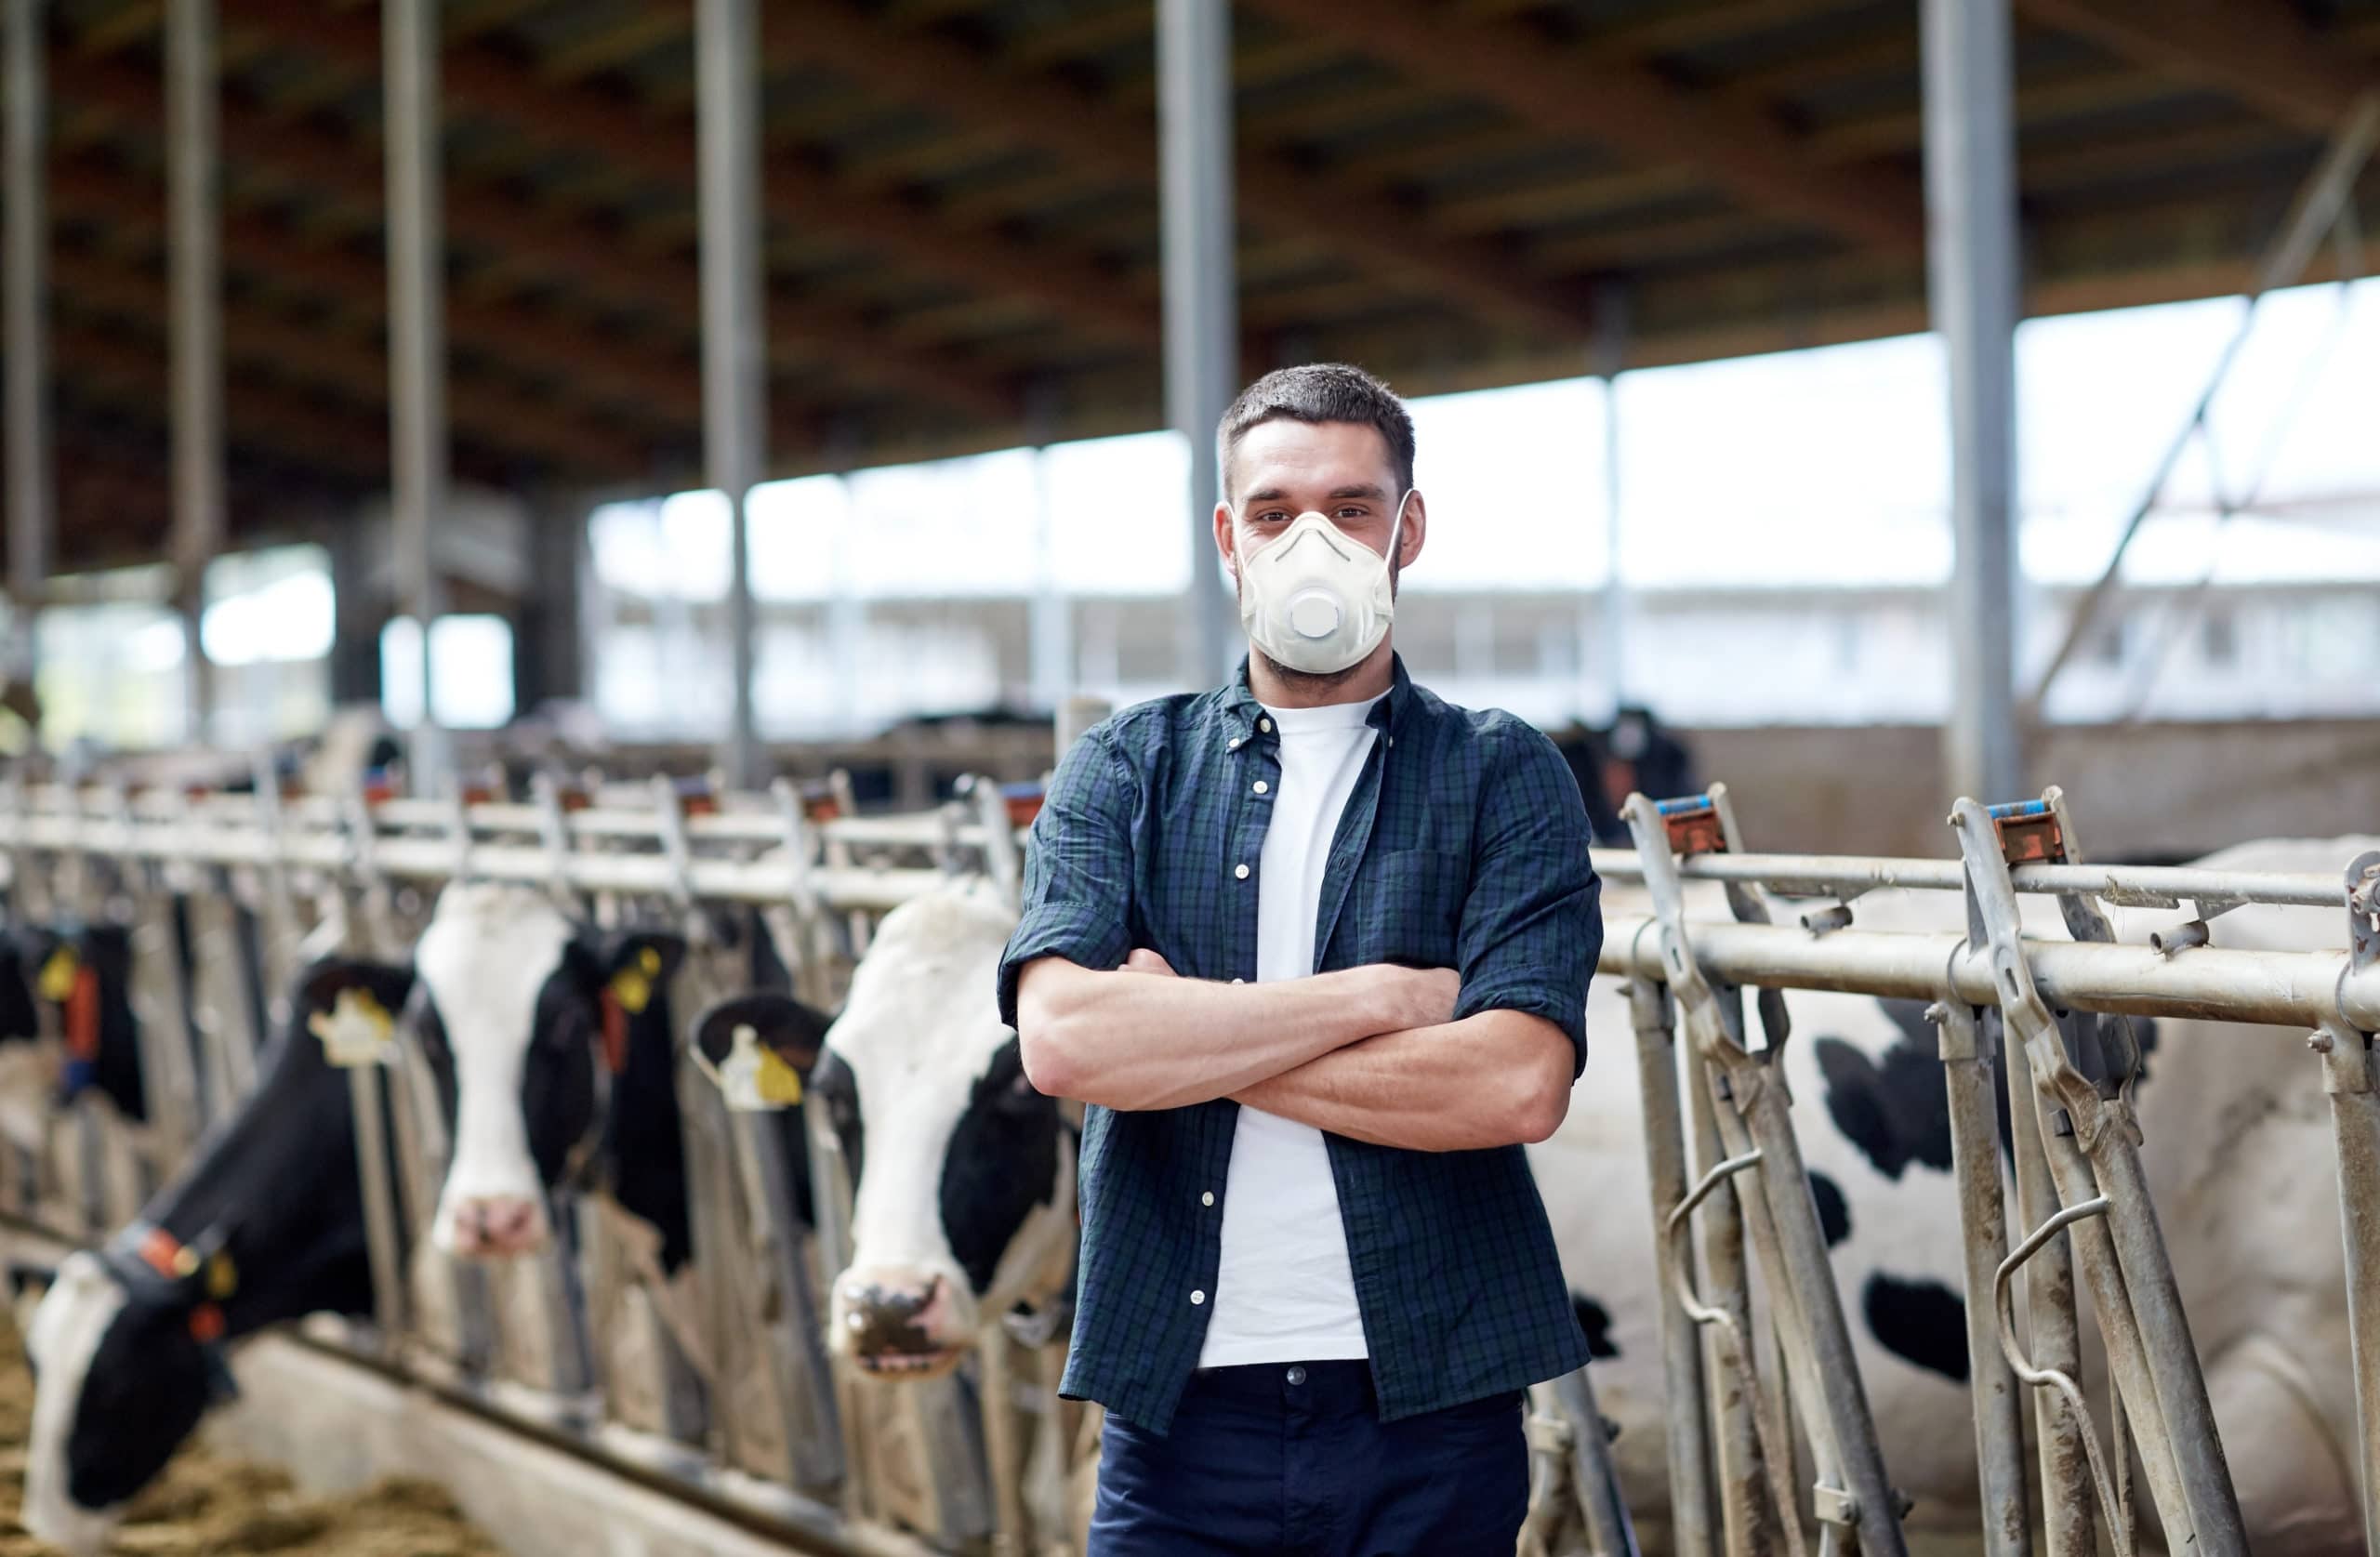 Tips to Keeping Dairy Farm Families, Employees Safe During the Coronavirus Pandemic